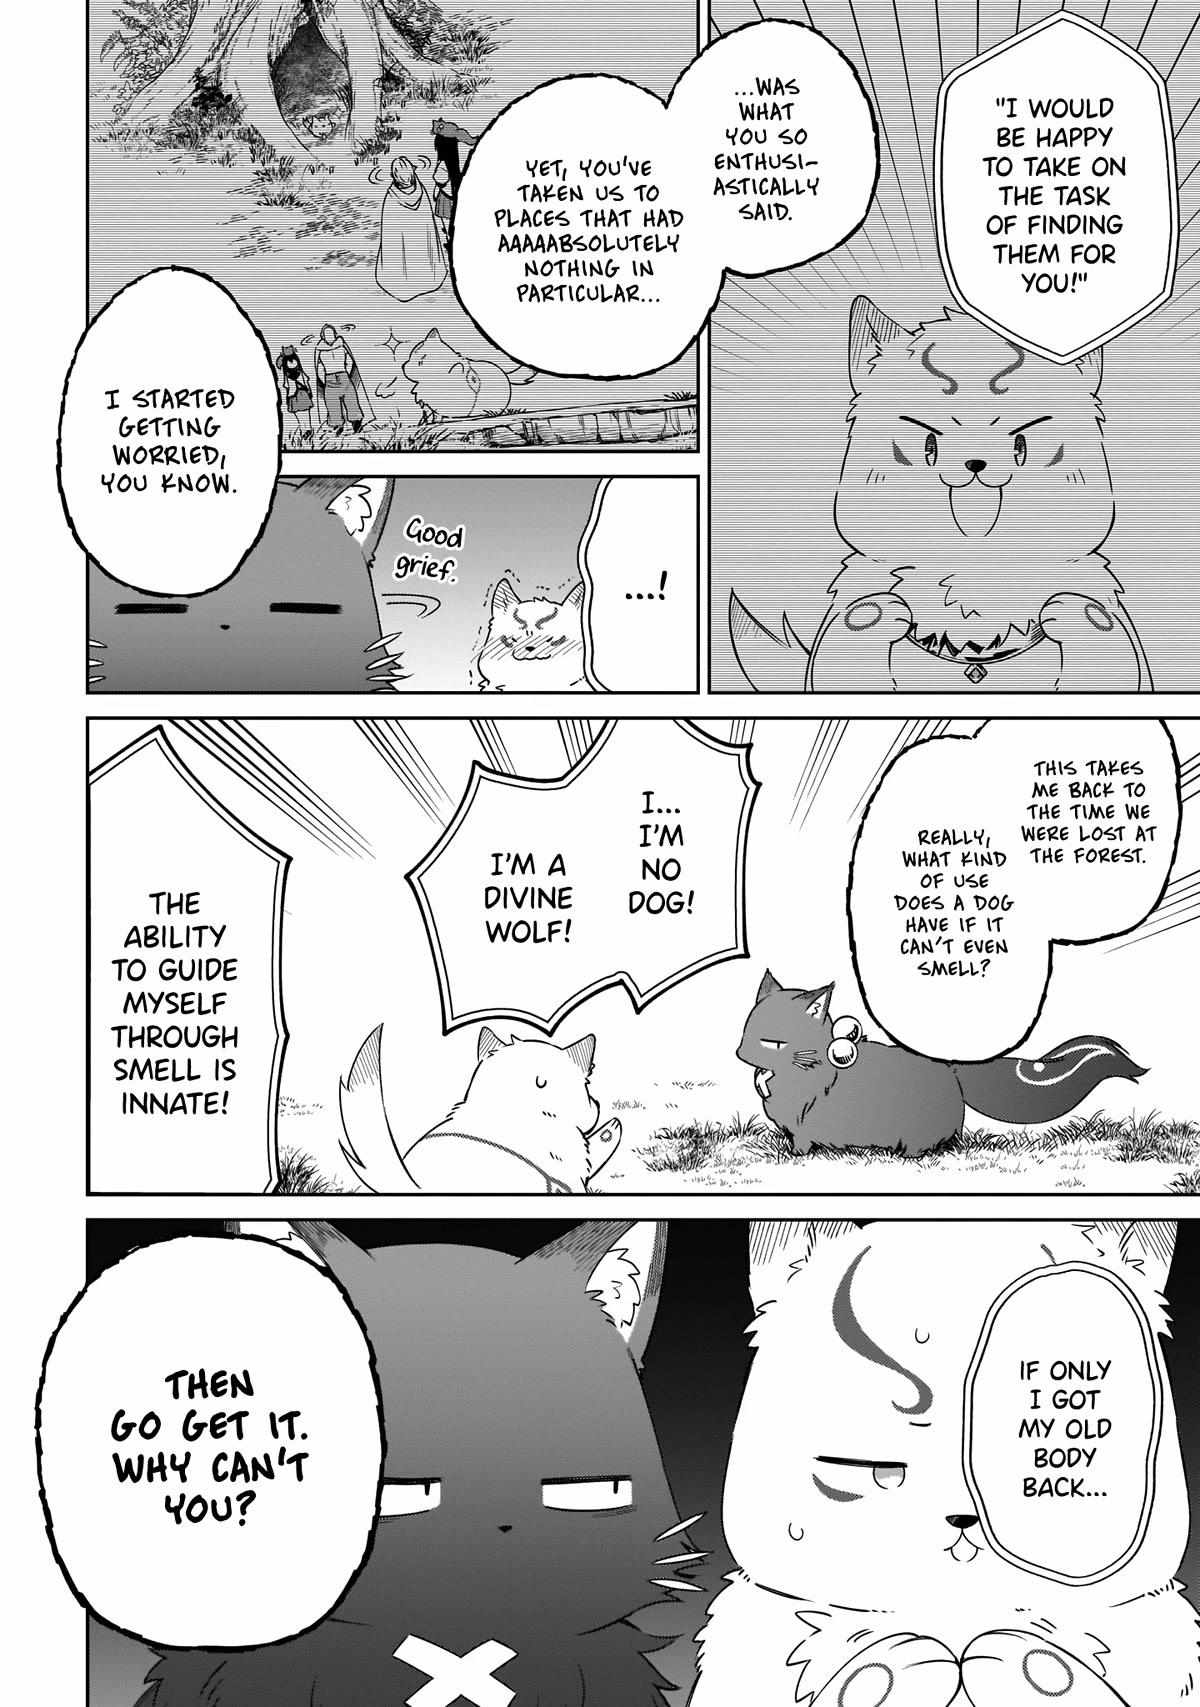 Saint? No, It's A Passing Demon! ~Absolutely Invincible Saint Travels With Mofumofu~ - Page 3